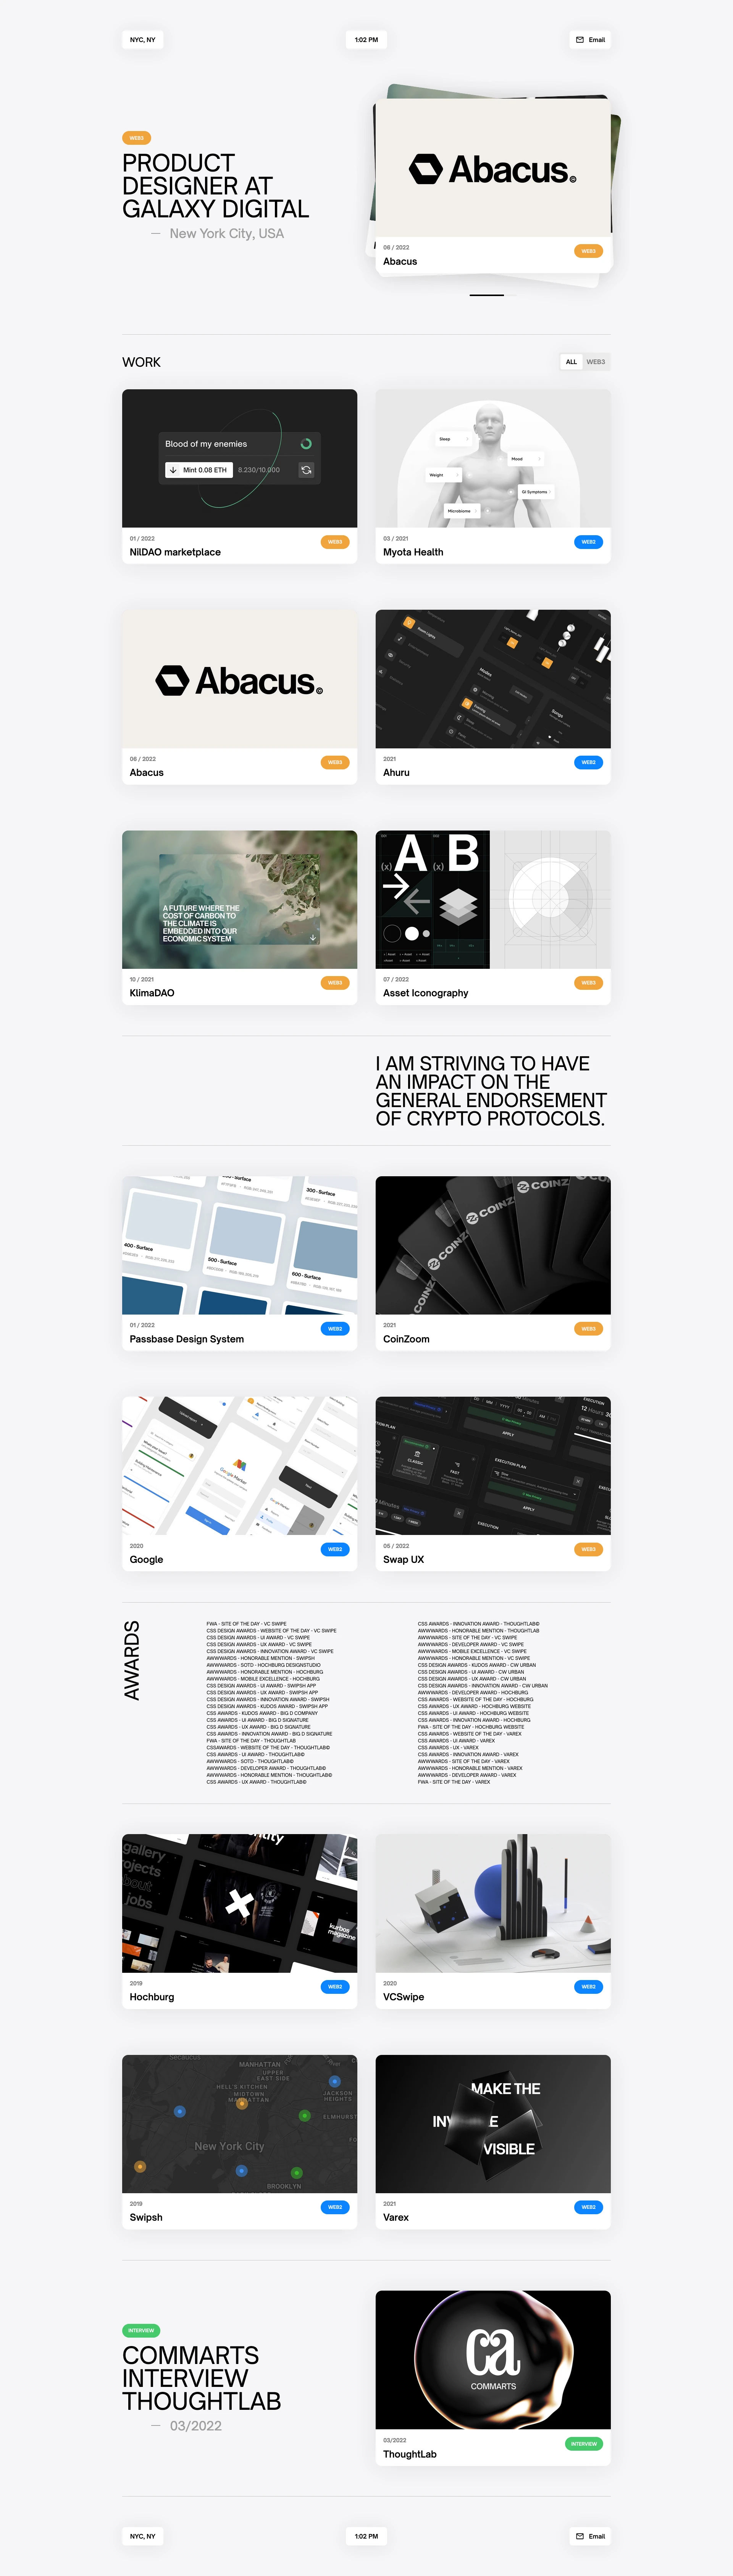 Lukas Kmoth Landing Page Example: Web3 Product Designer at Galaxy Digital. Specialized in crypto protocol design and design systems.